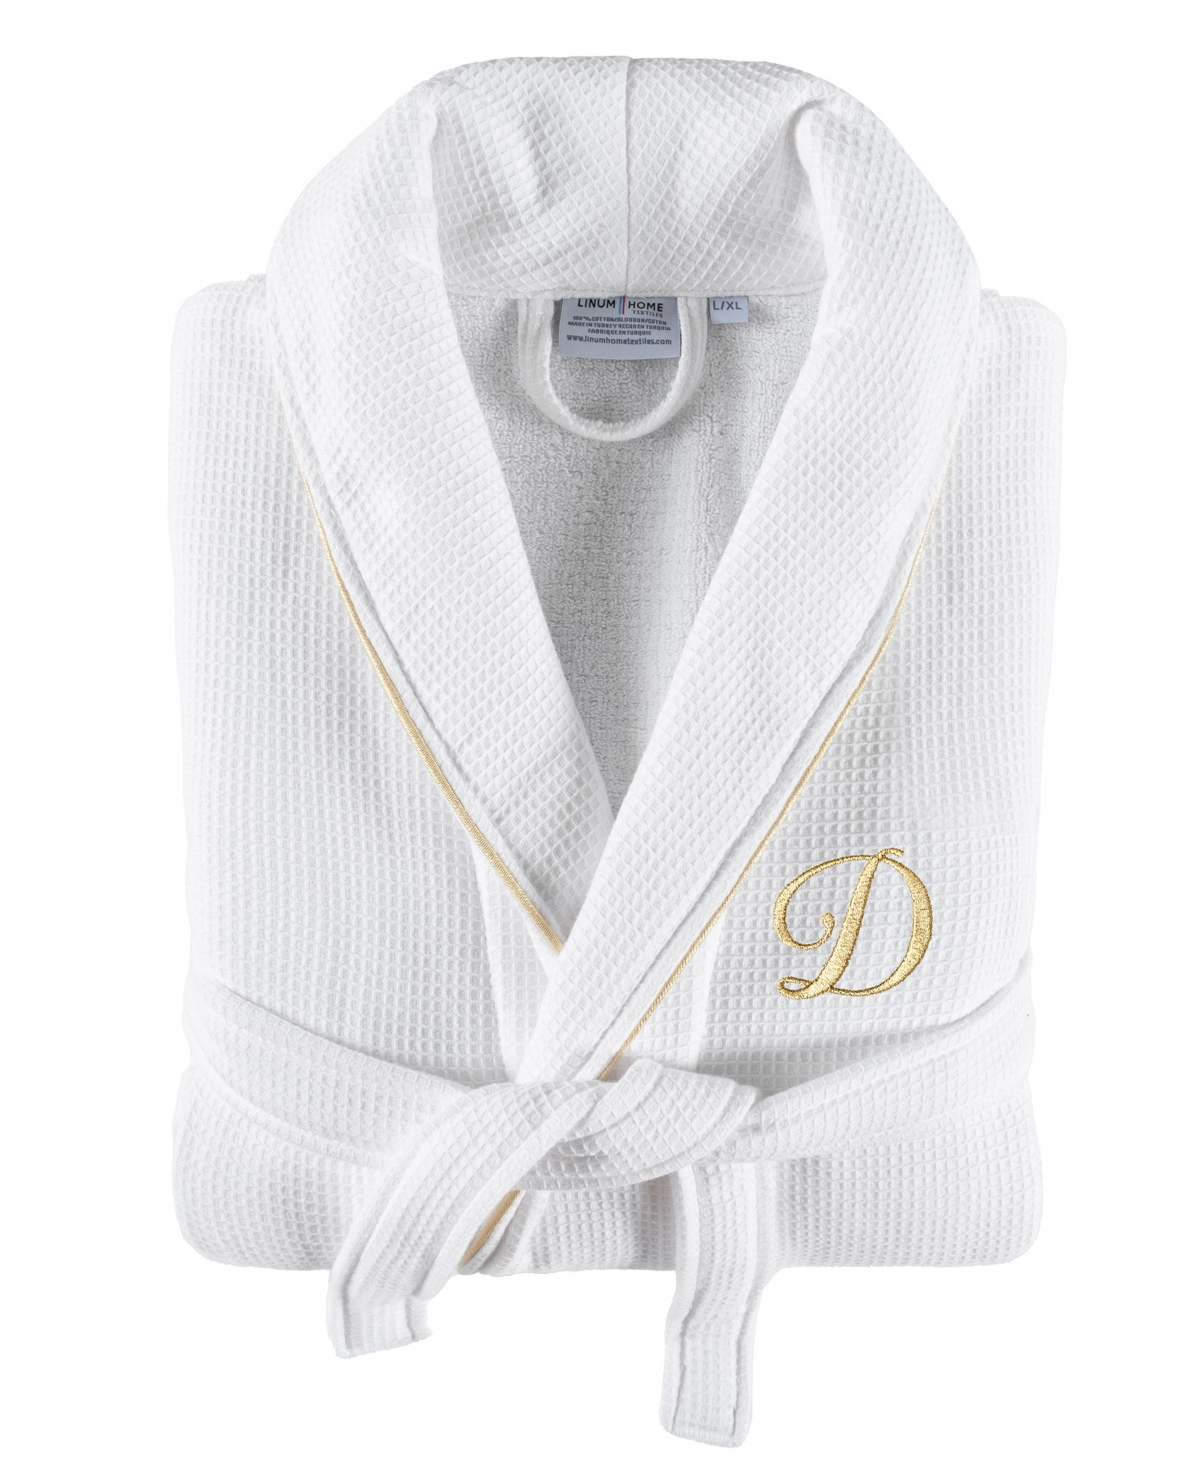 Linum Home Textiles 100% Turkish Cotton Unisex Personalized Waffle Weave Terry Bathrobe With Satin Piped Trim In White D